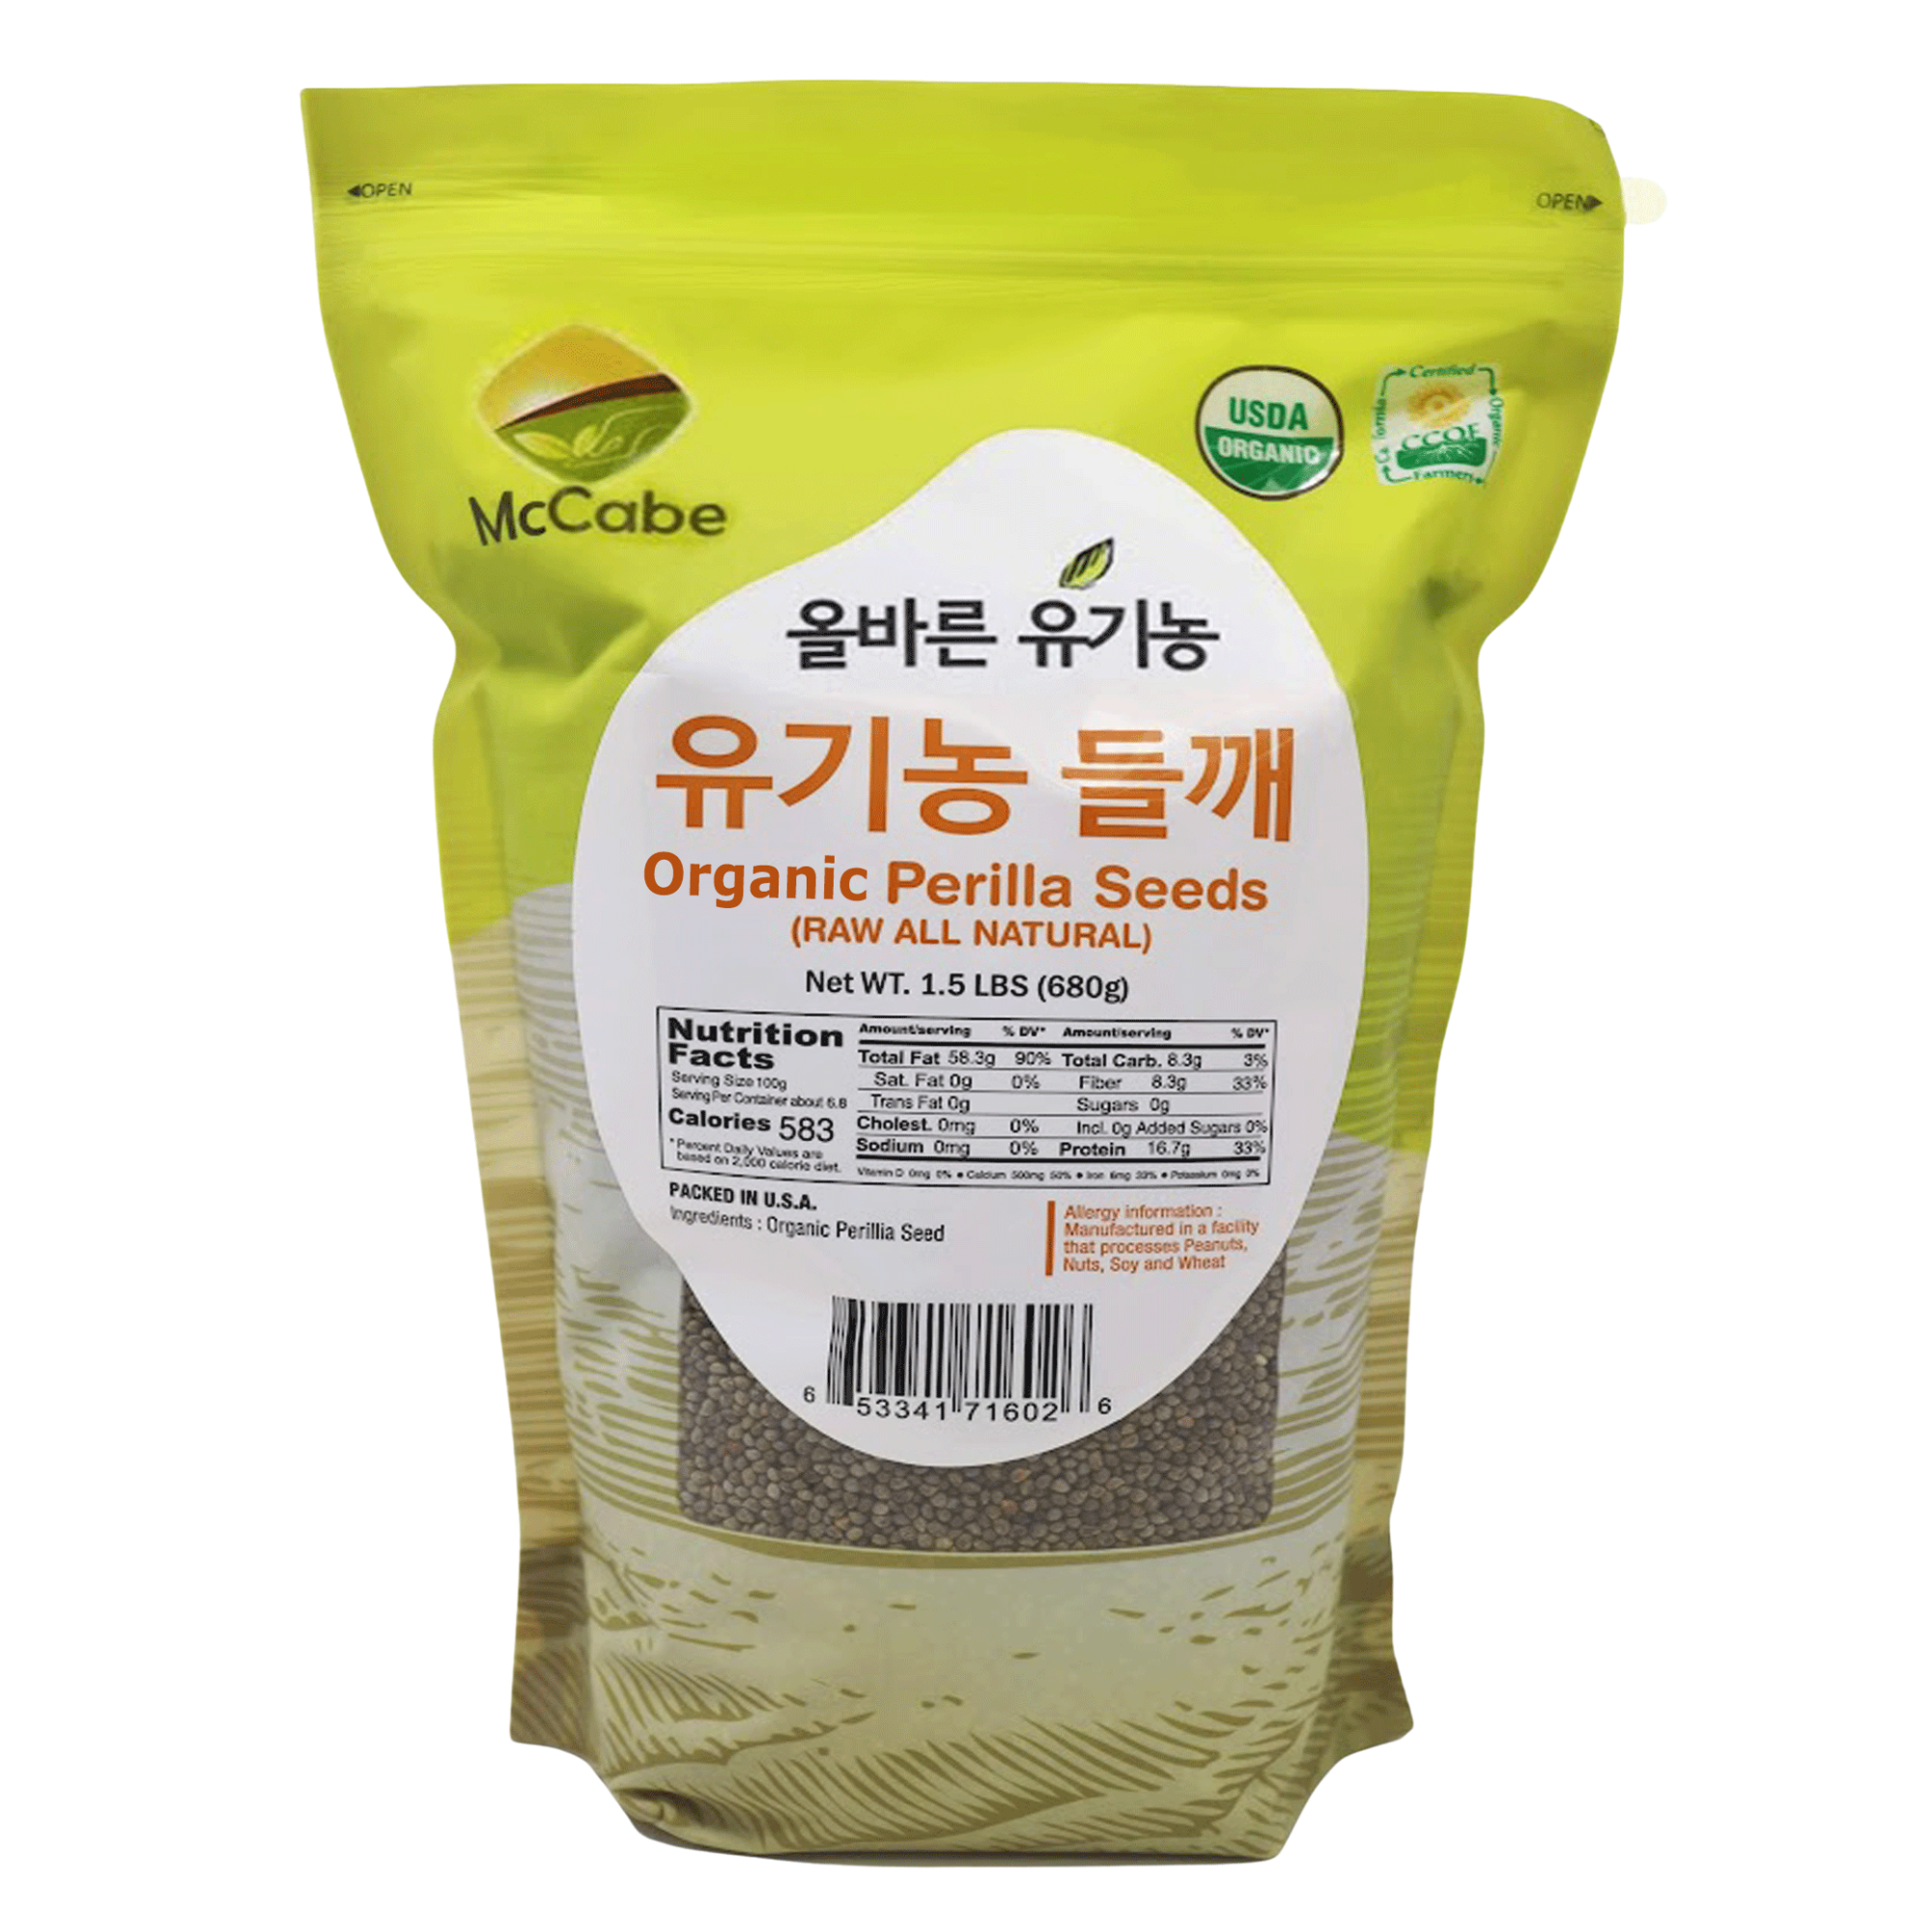 McCabe Organic Raw Perilla Seeds - Raw Perilla Seeds 1.5 Lbs | USDA and CCOF Certified | Packed in USA - image 1 of 6